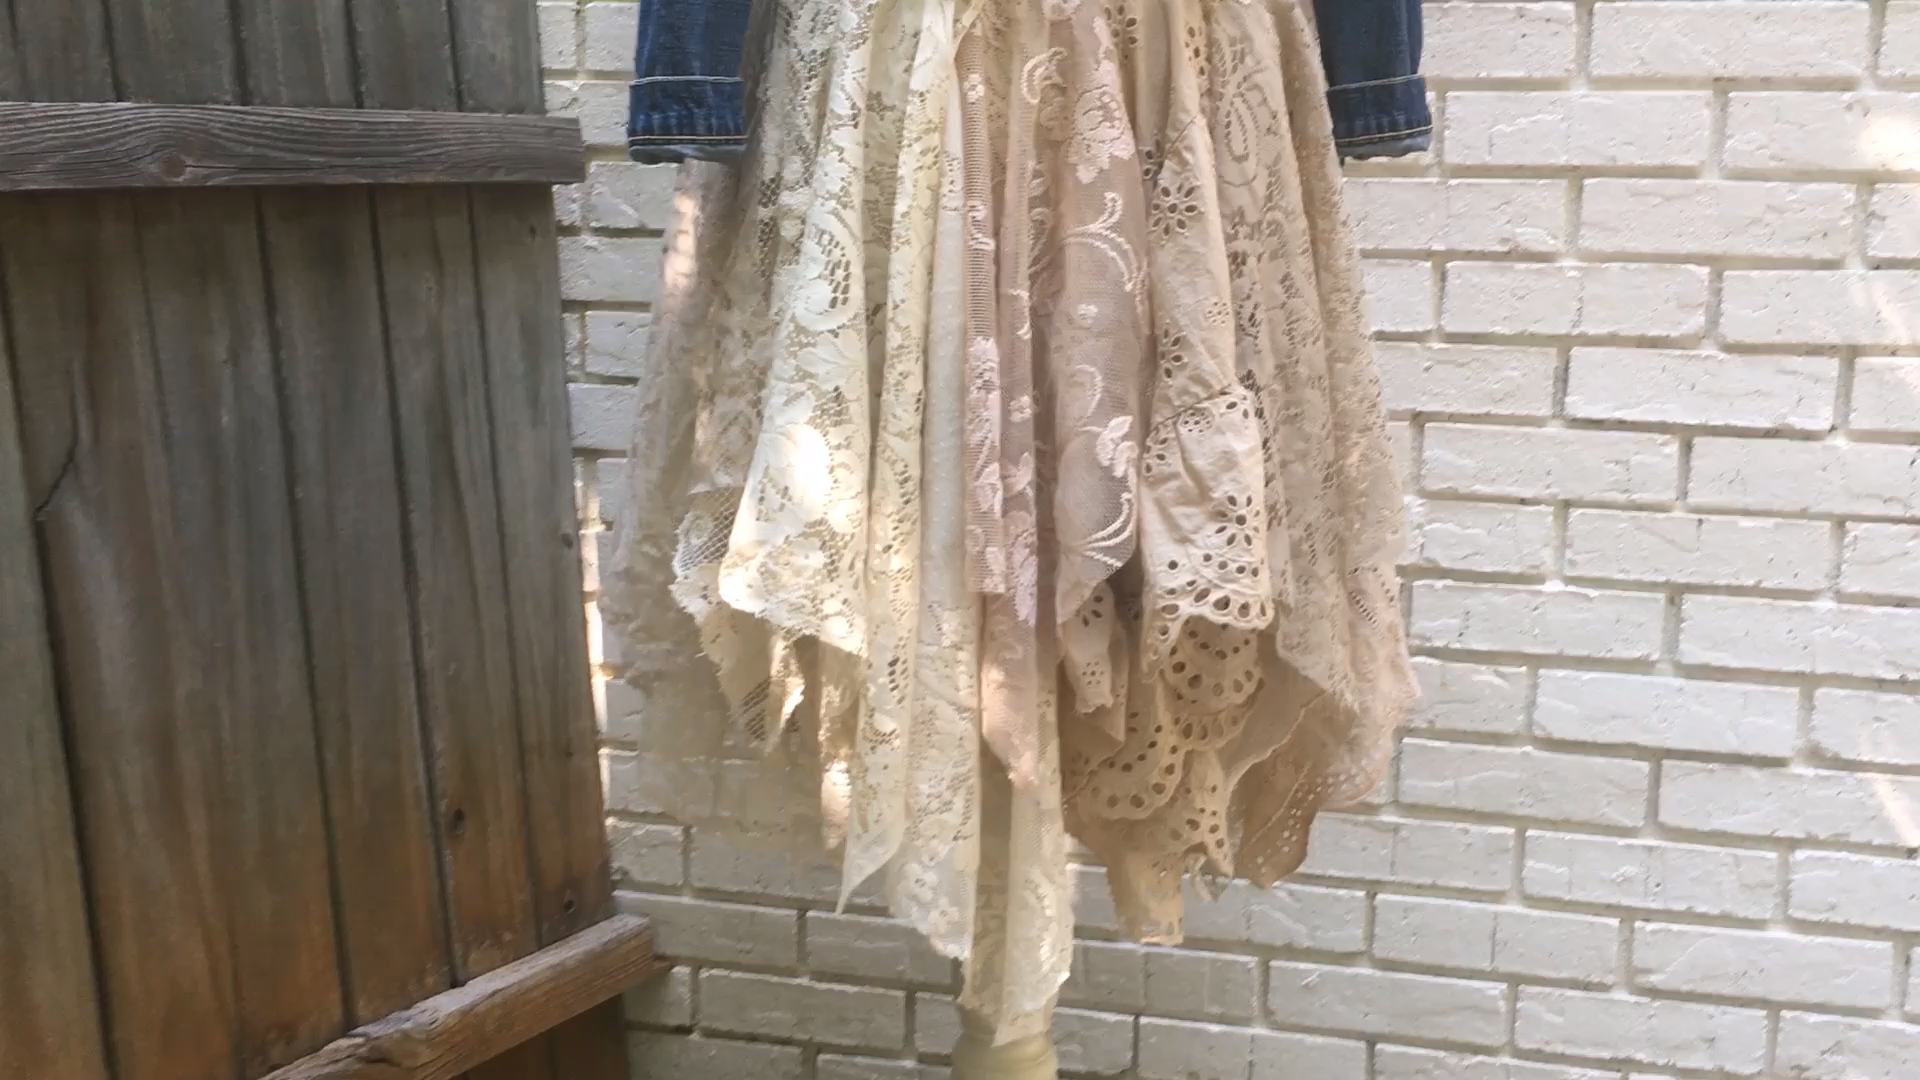 Layered Lace Skirt DIY -   16 DIY Clothes Lace girls ideas